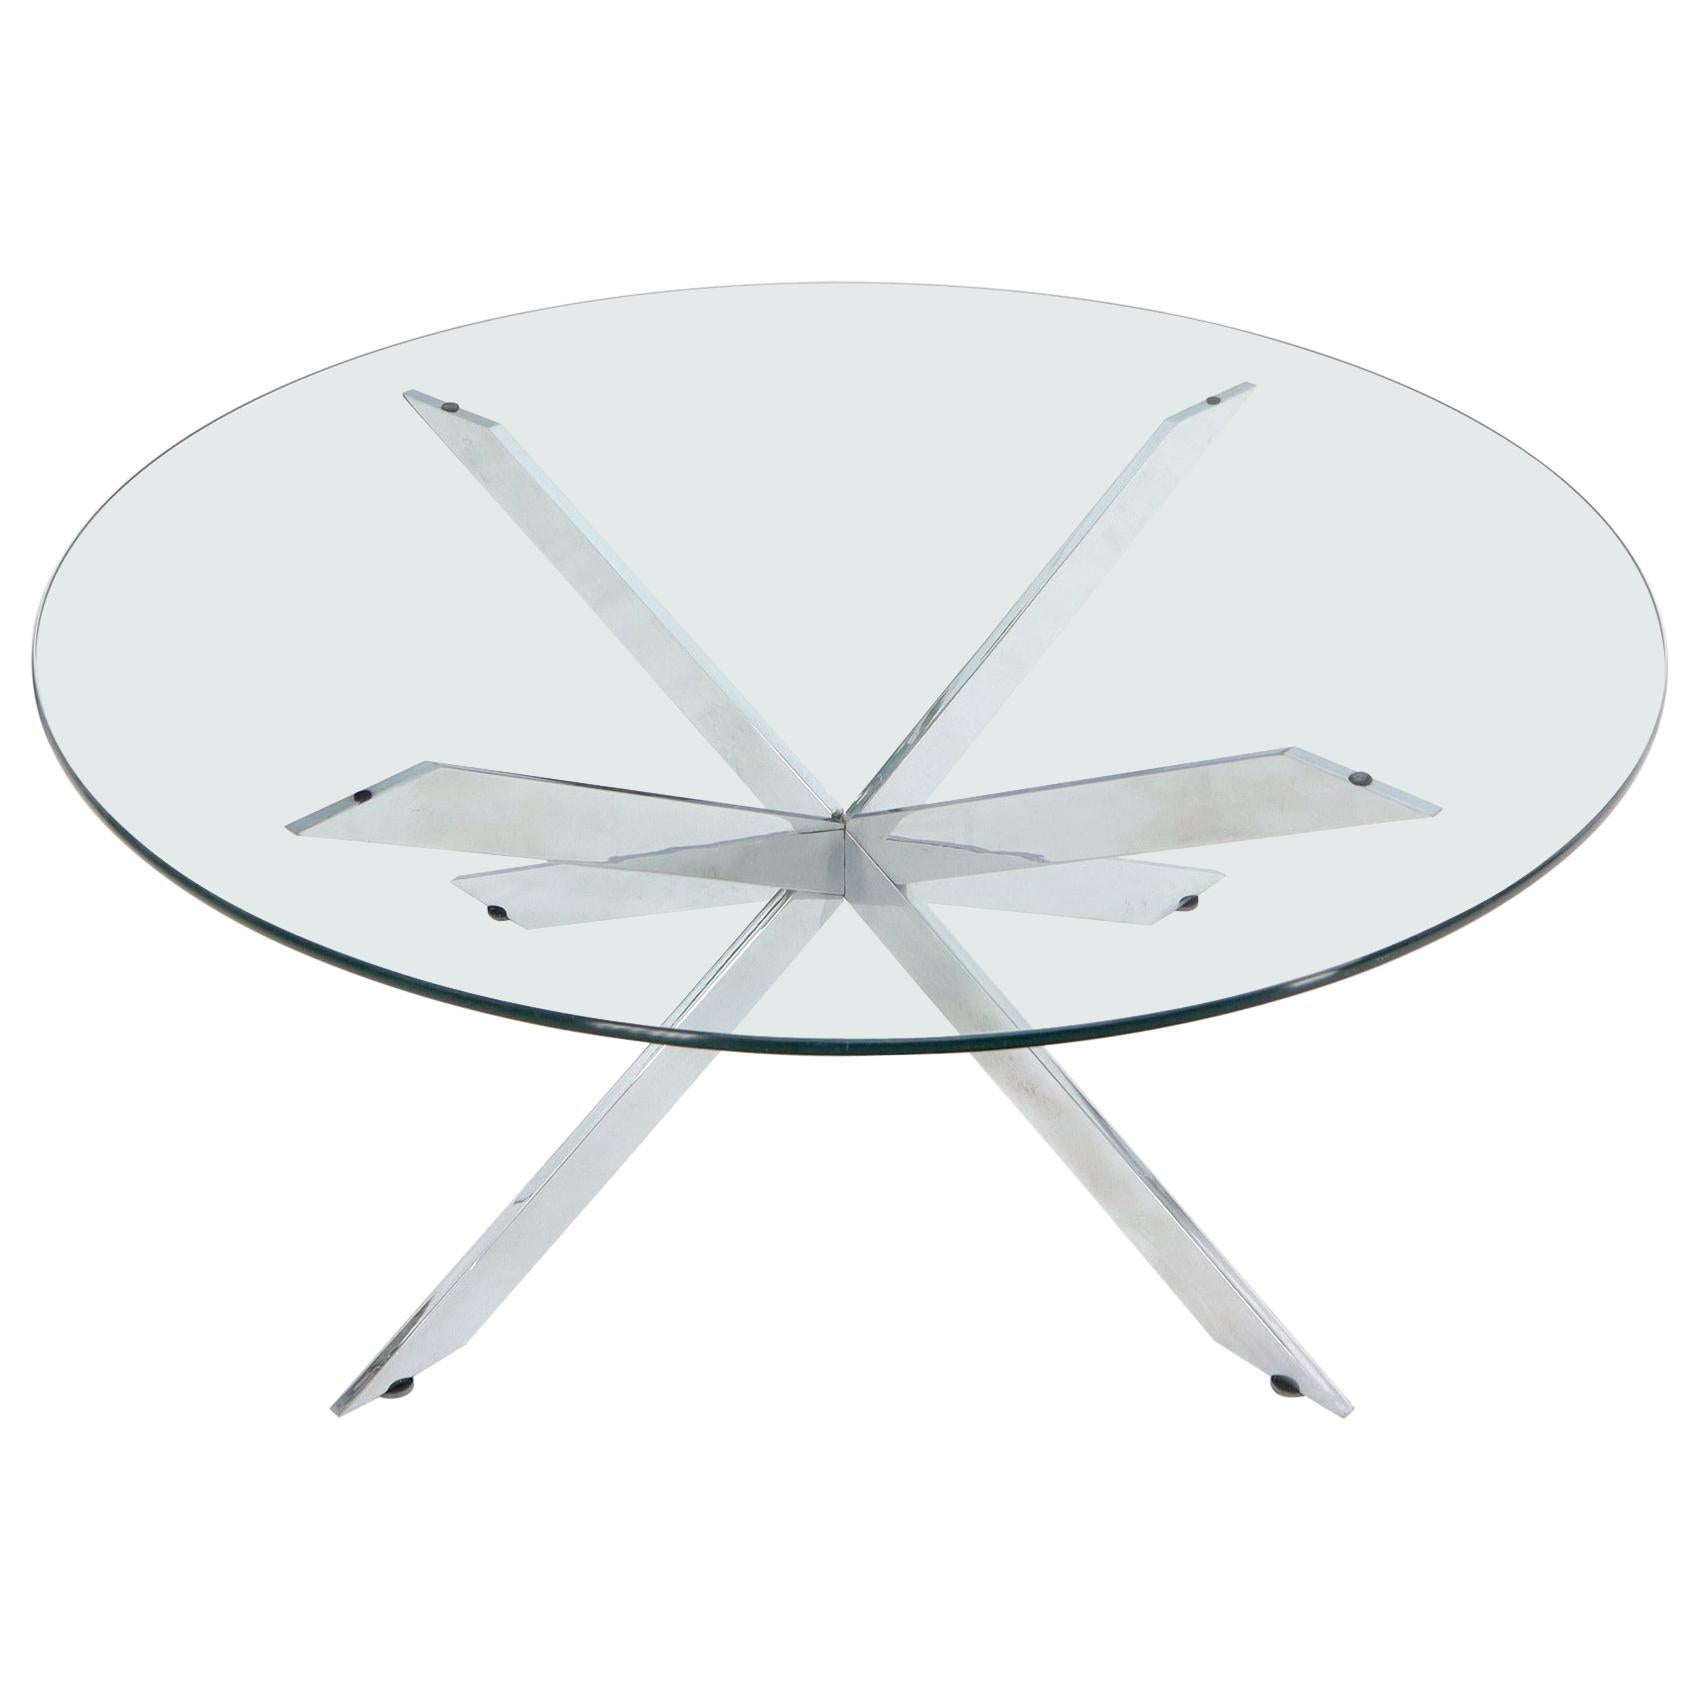 Heavy Chrome Jacks Style Spikes Base Round Glass Top Coffee Table For Sale